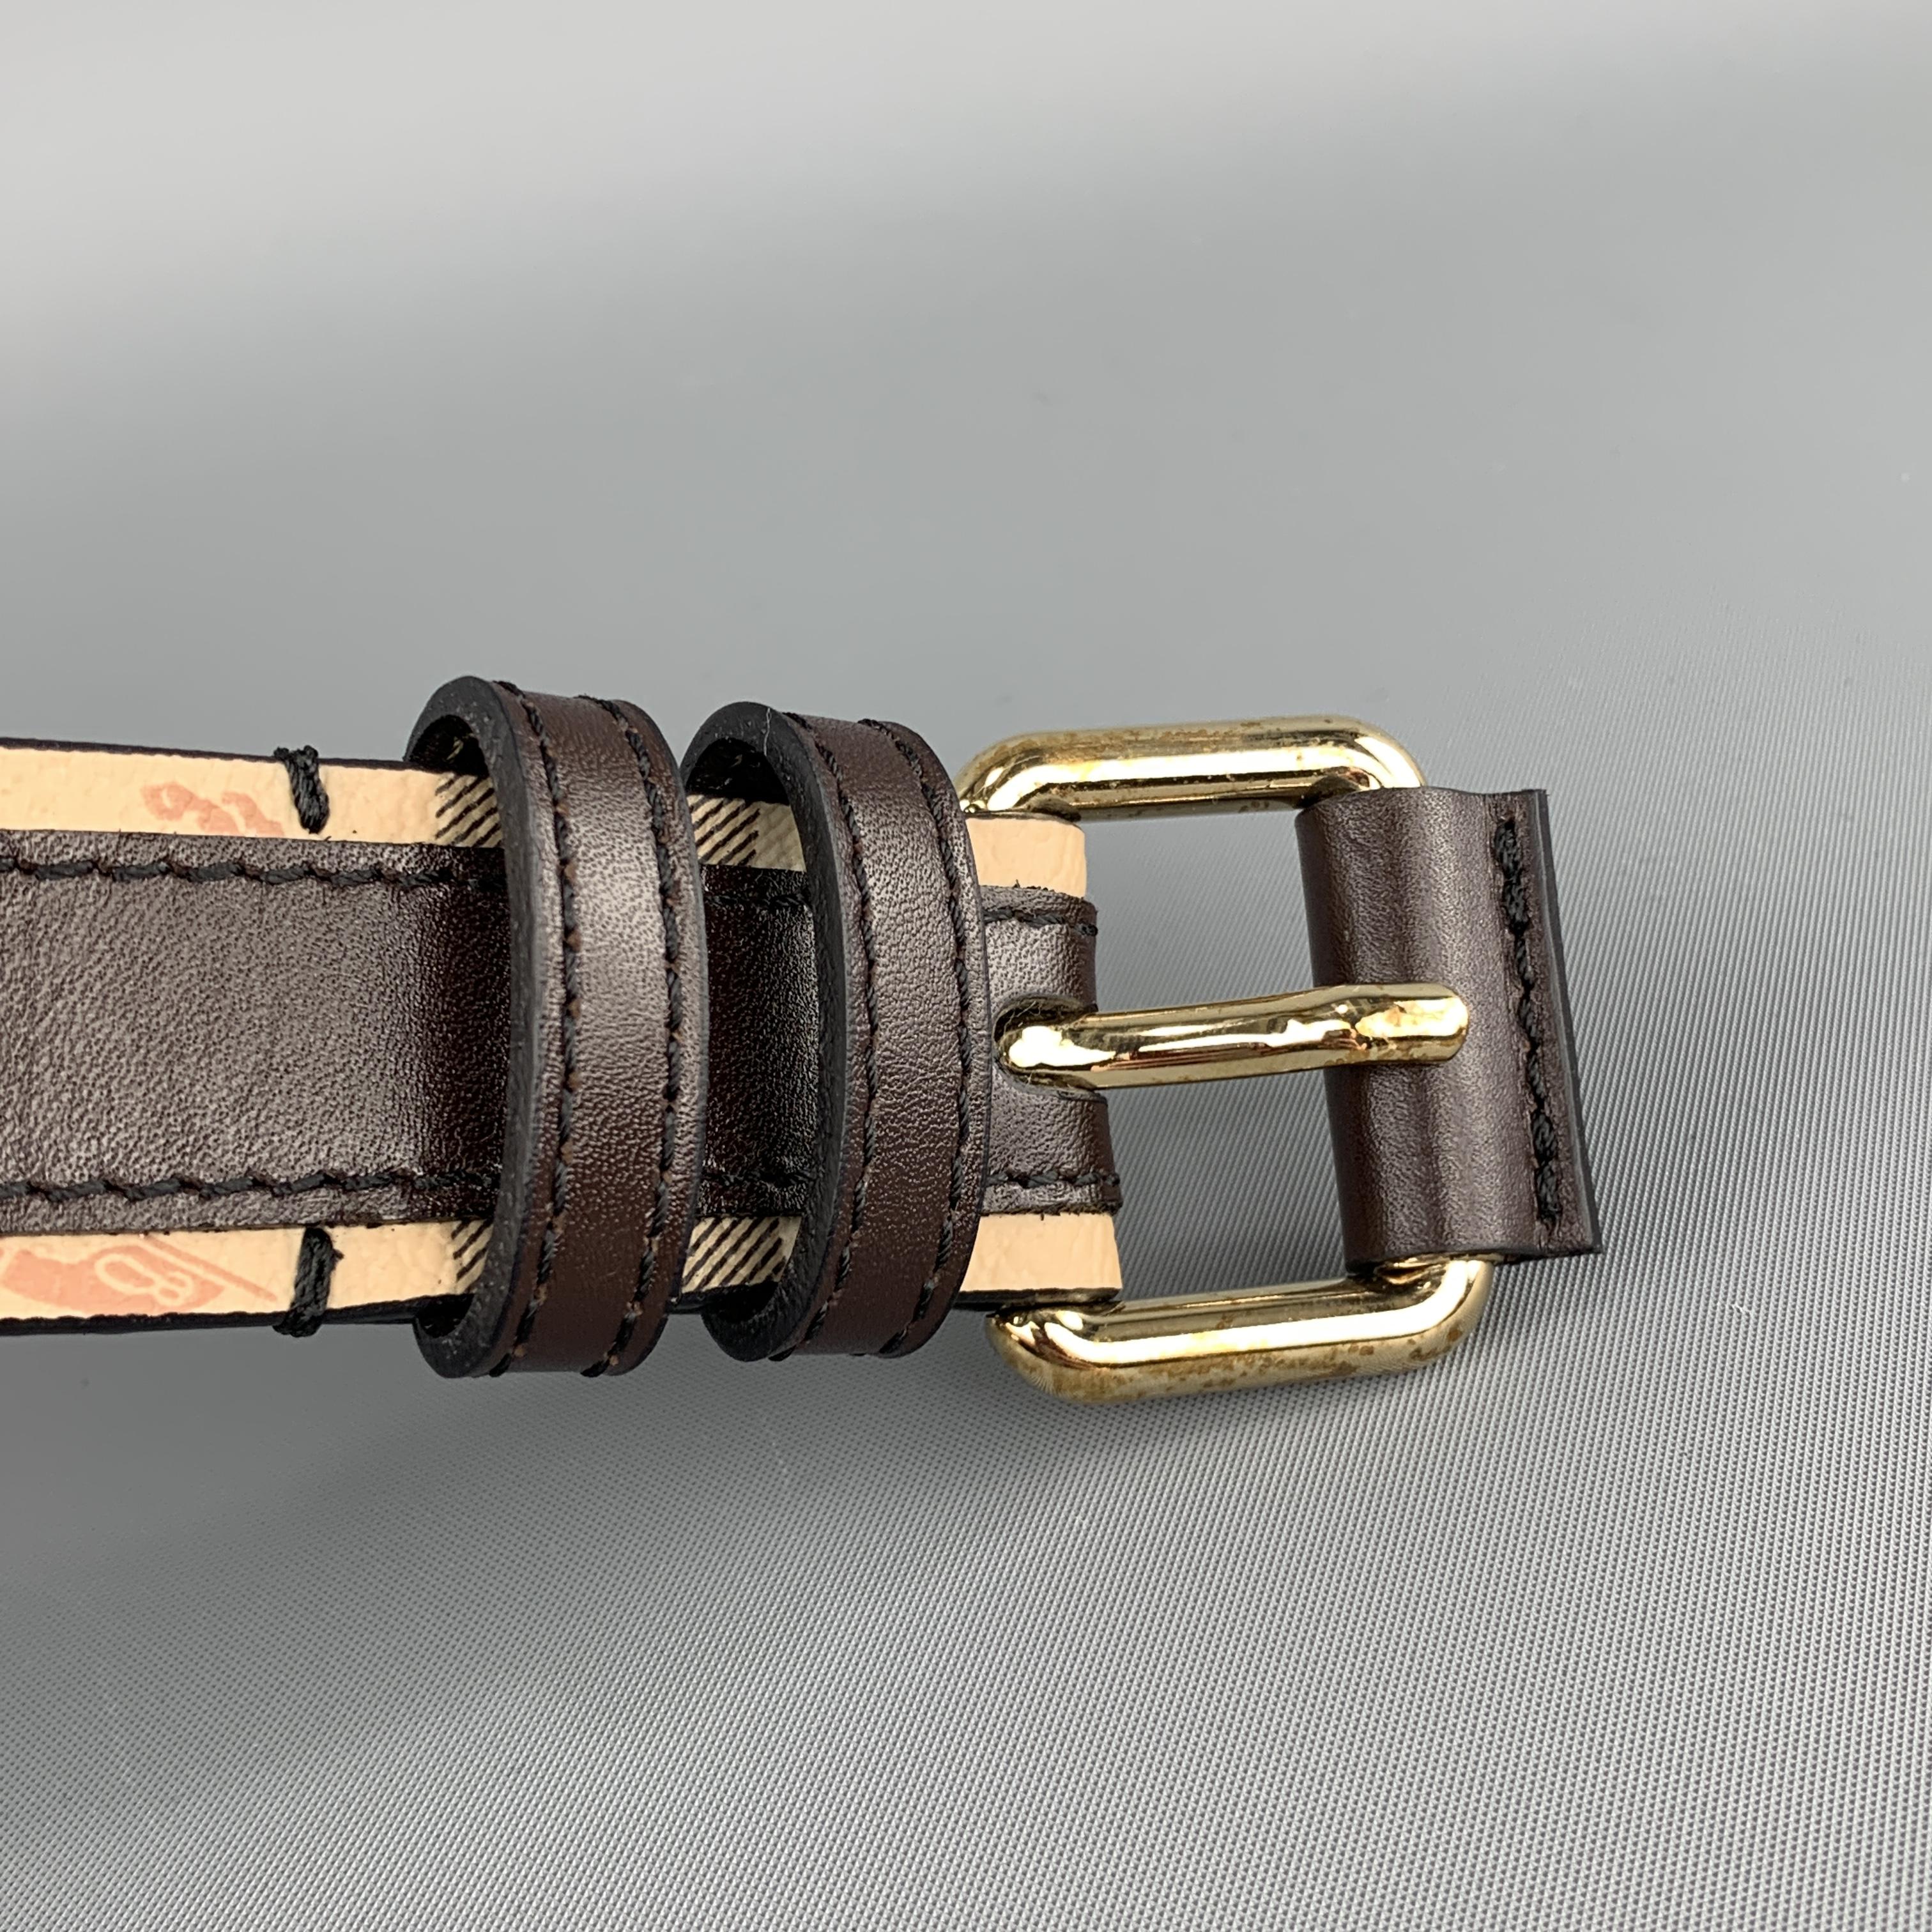 BURBERRY belt features a tan signature plaid coated canvas strap with brown leather stripe and gold tone buckle. New but wear on metal from storage. As-is. Made in Italy.
 
Brand New with Defects.
Marked: 42 / 105
 
Length: 47 in.
Width: 1 in.
Fits: